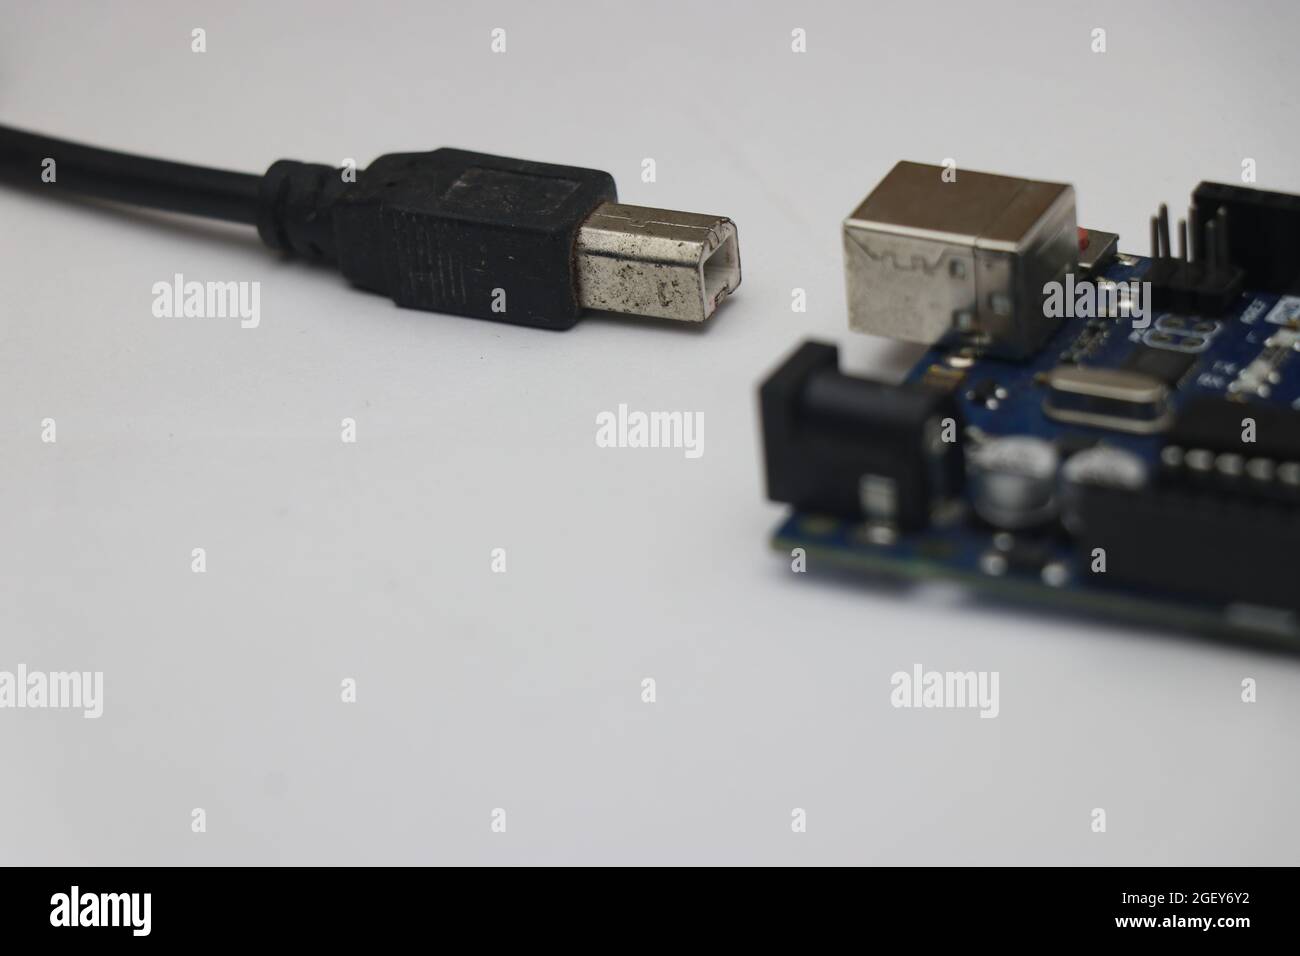 Microcontroller with programming cable disconnected. Programmable control board to make electronic projects Stock Photo